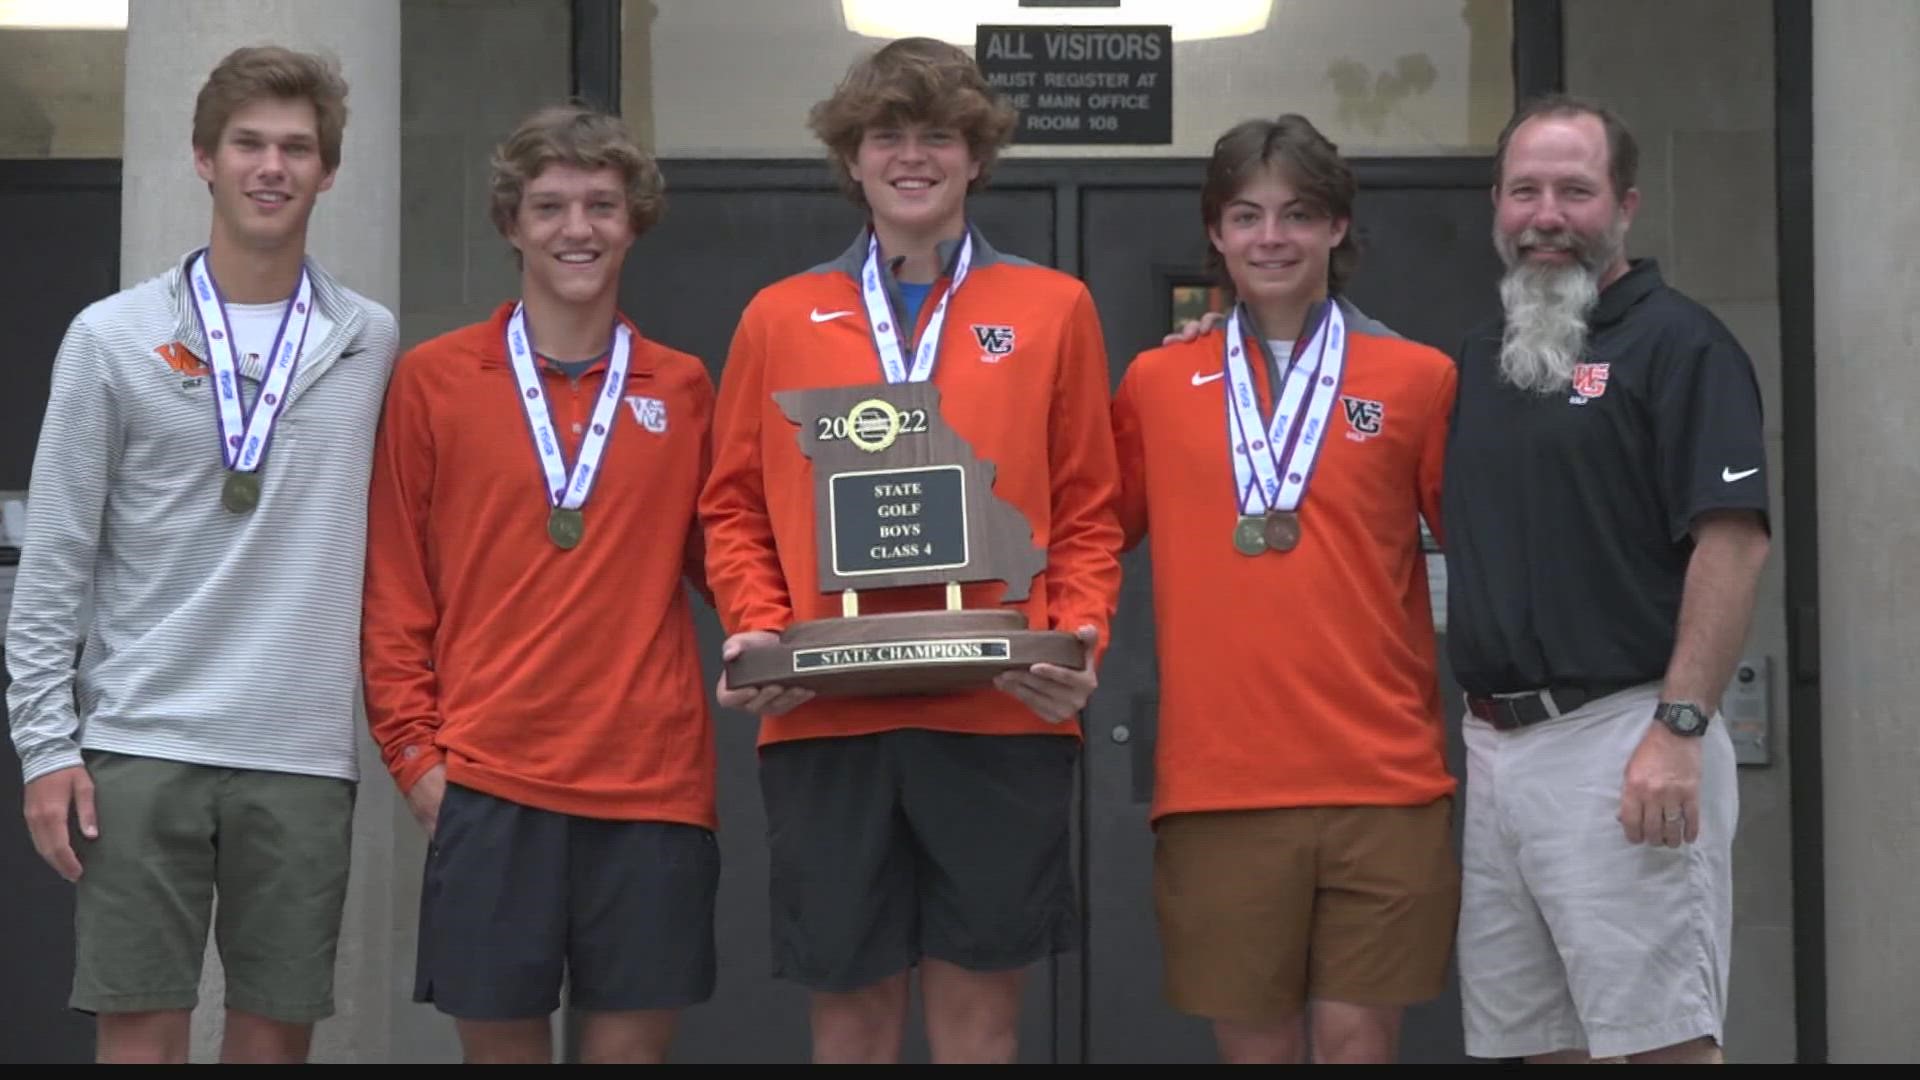 The Statesmen are state champs after an incredible comeback in the second day of the state title match